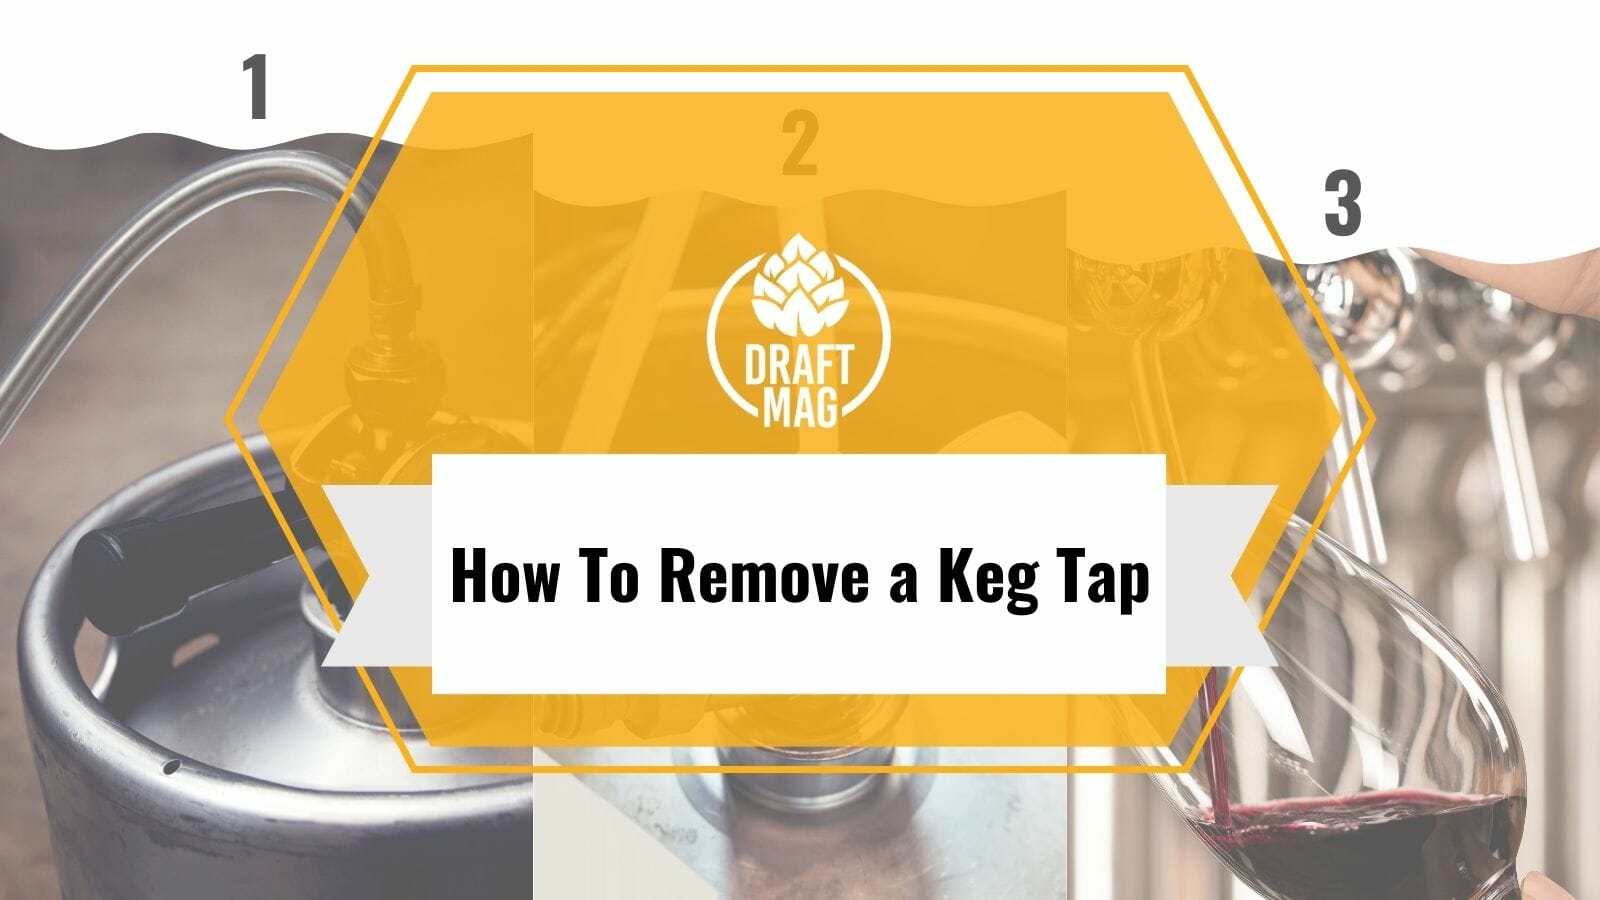 How To Remove a Keg Tap